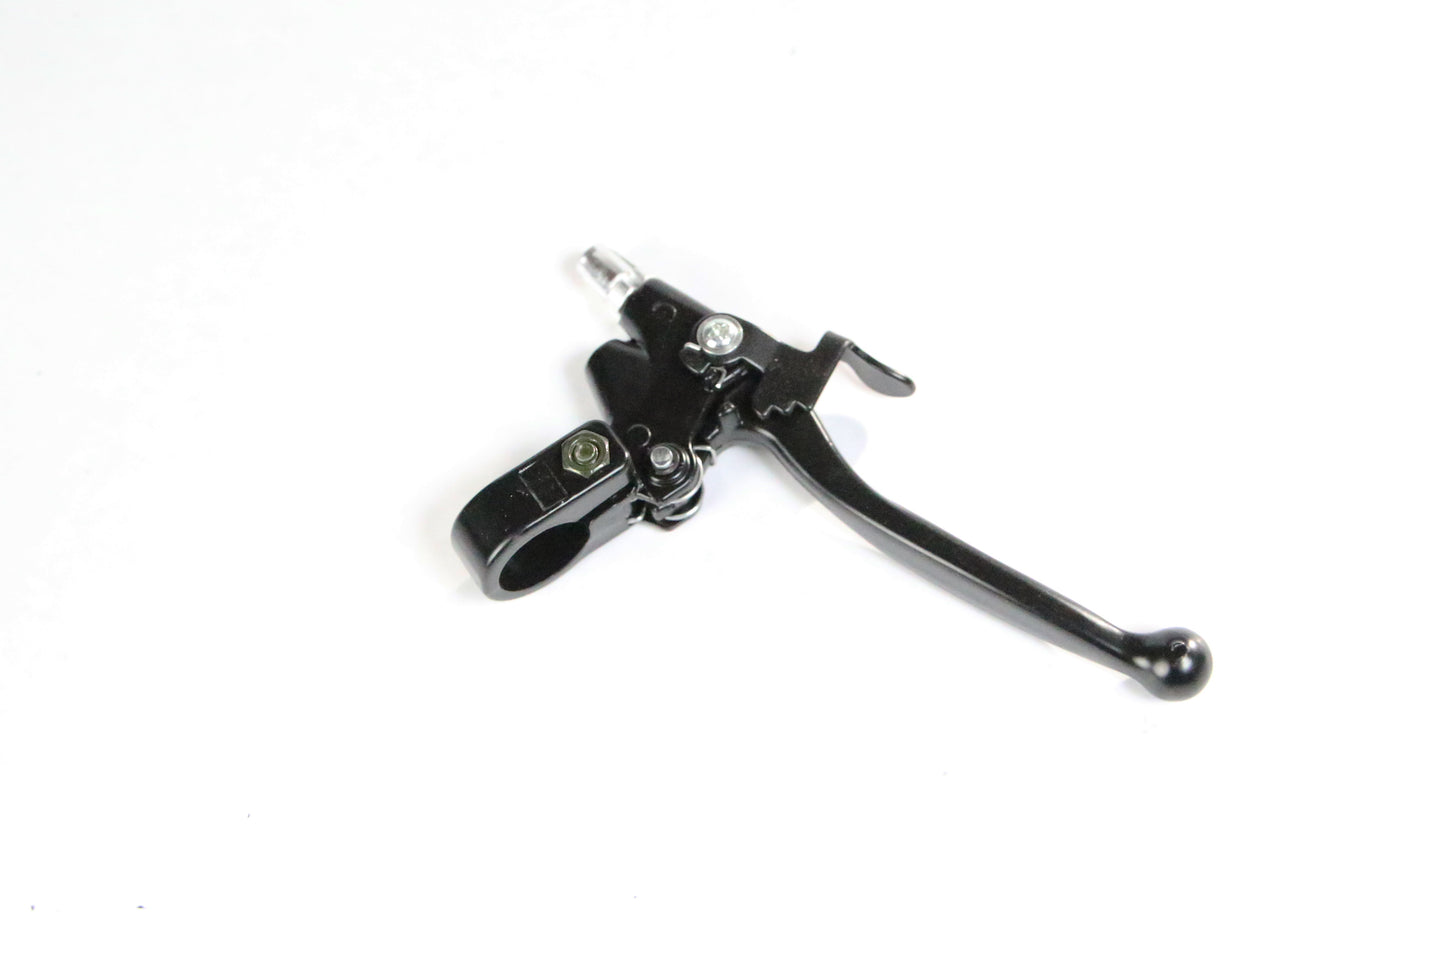 Clutch Lever Replacement for Motorized Bicycle